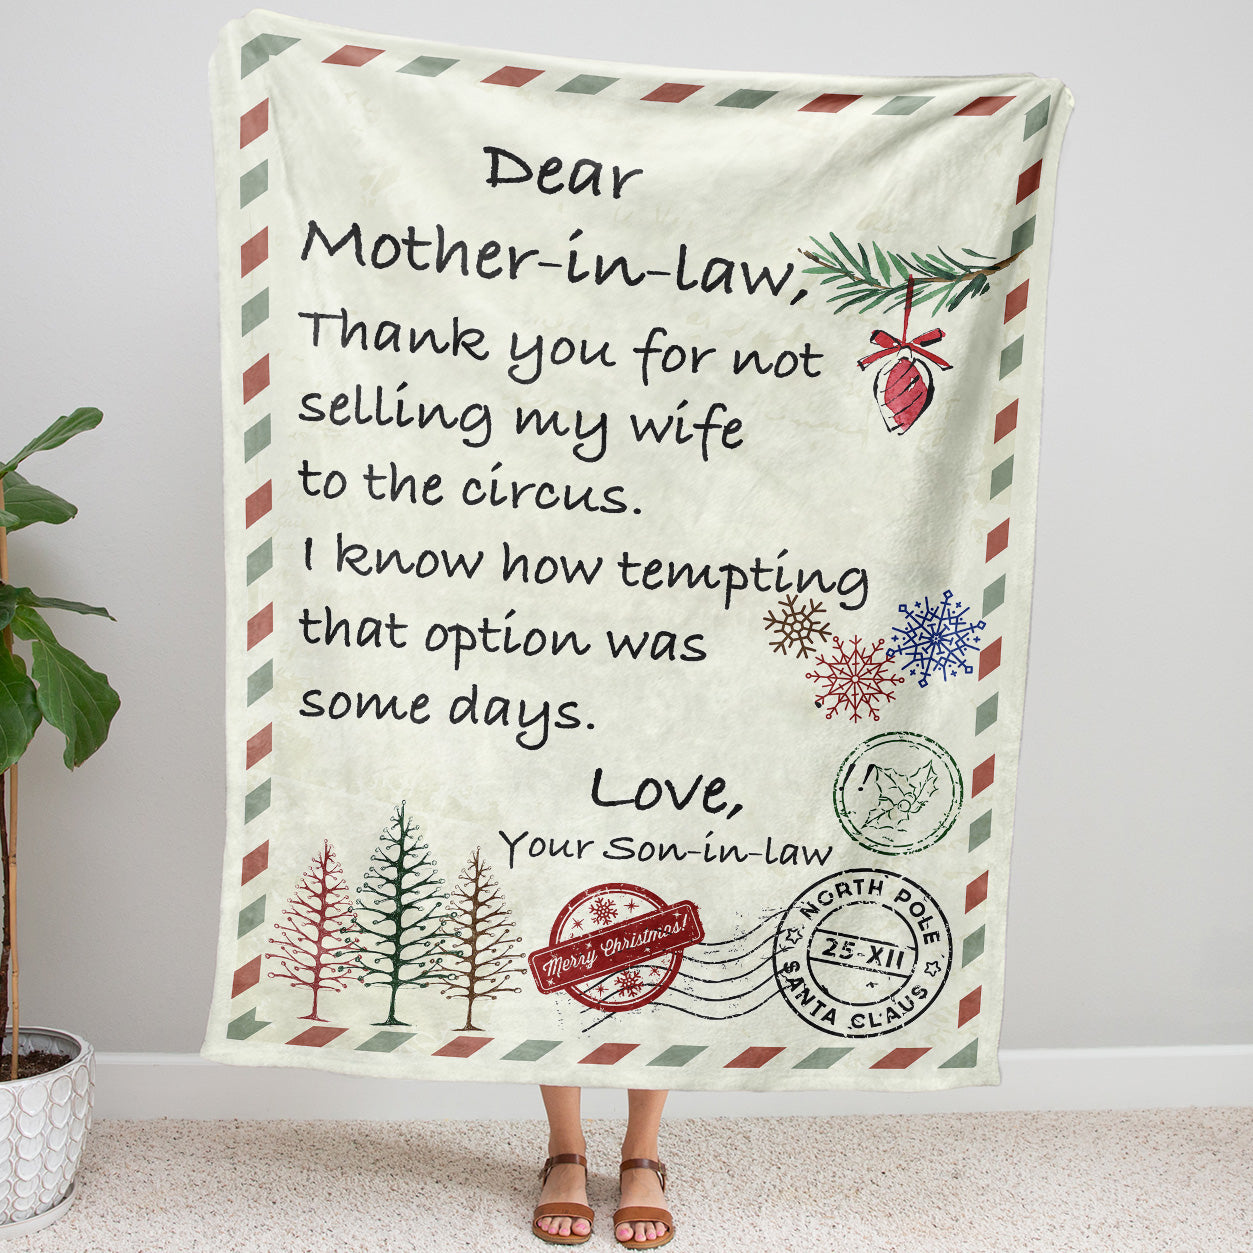 Blanket Christmas Gift ideas for Mother in Law from Son in Law Customize Personalize Love with Your Daughter 20121113 - Sherpa Blanket